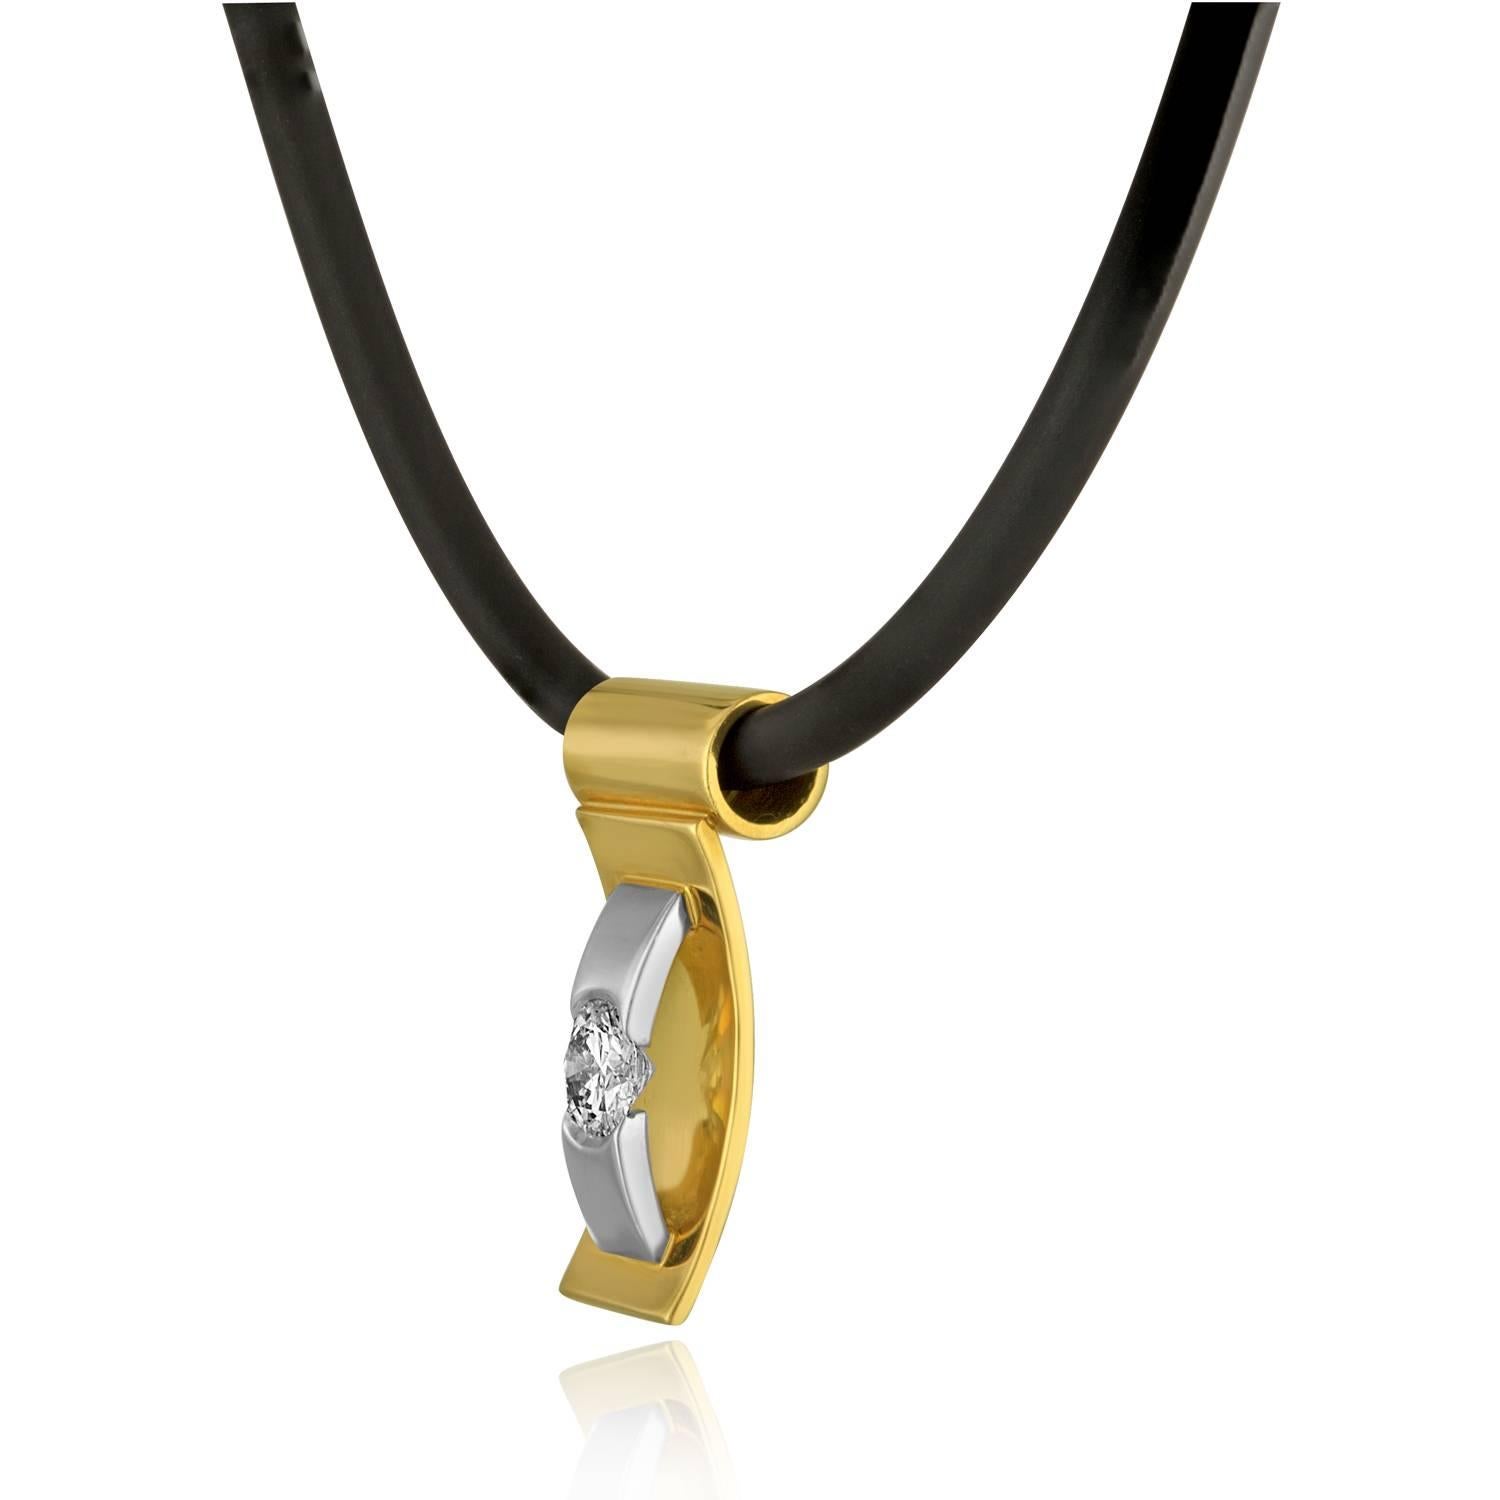 Very Unusual & Abstract Unisex Necklace.
The pendant / Slide is 18K Yellow & White Gold
The round stone is GIA certified F SI1 0.57 Carats
The pendant/slide hangs on a rubber necklace.
The necklace measures 18.5